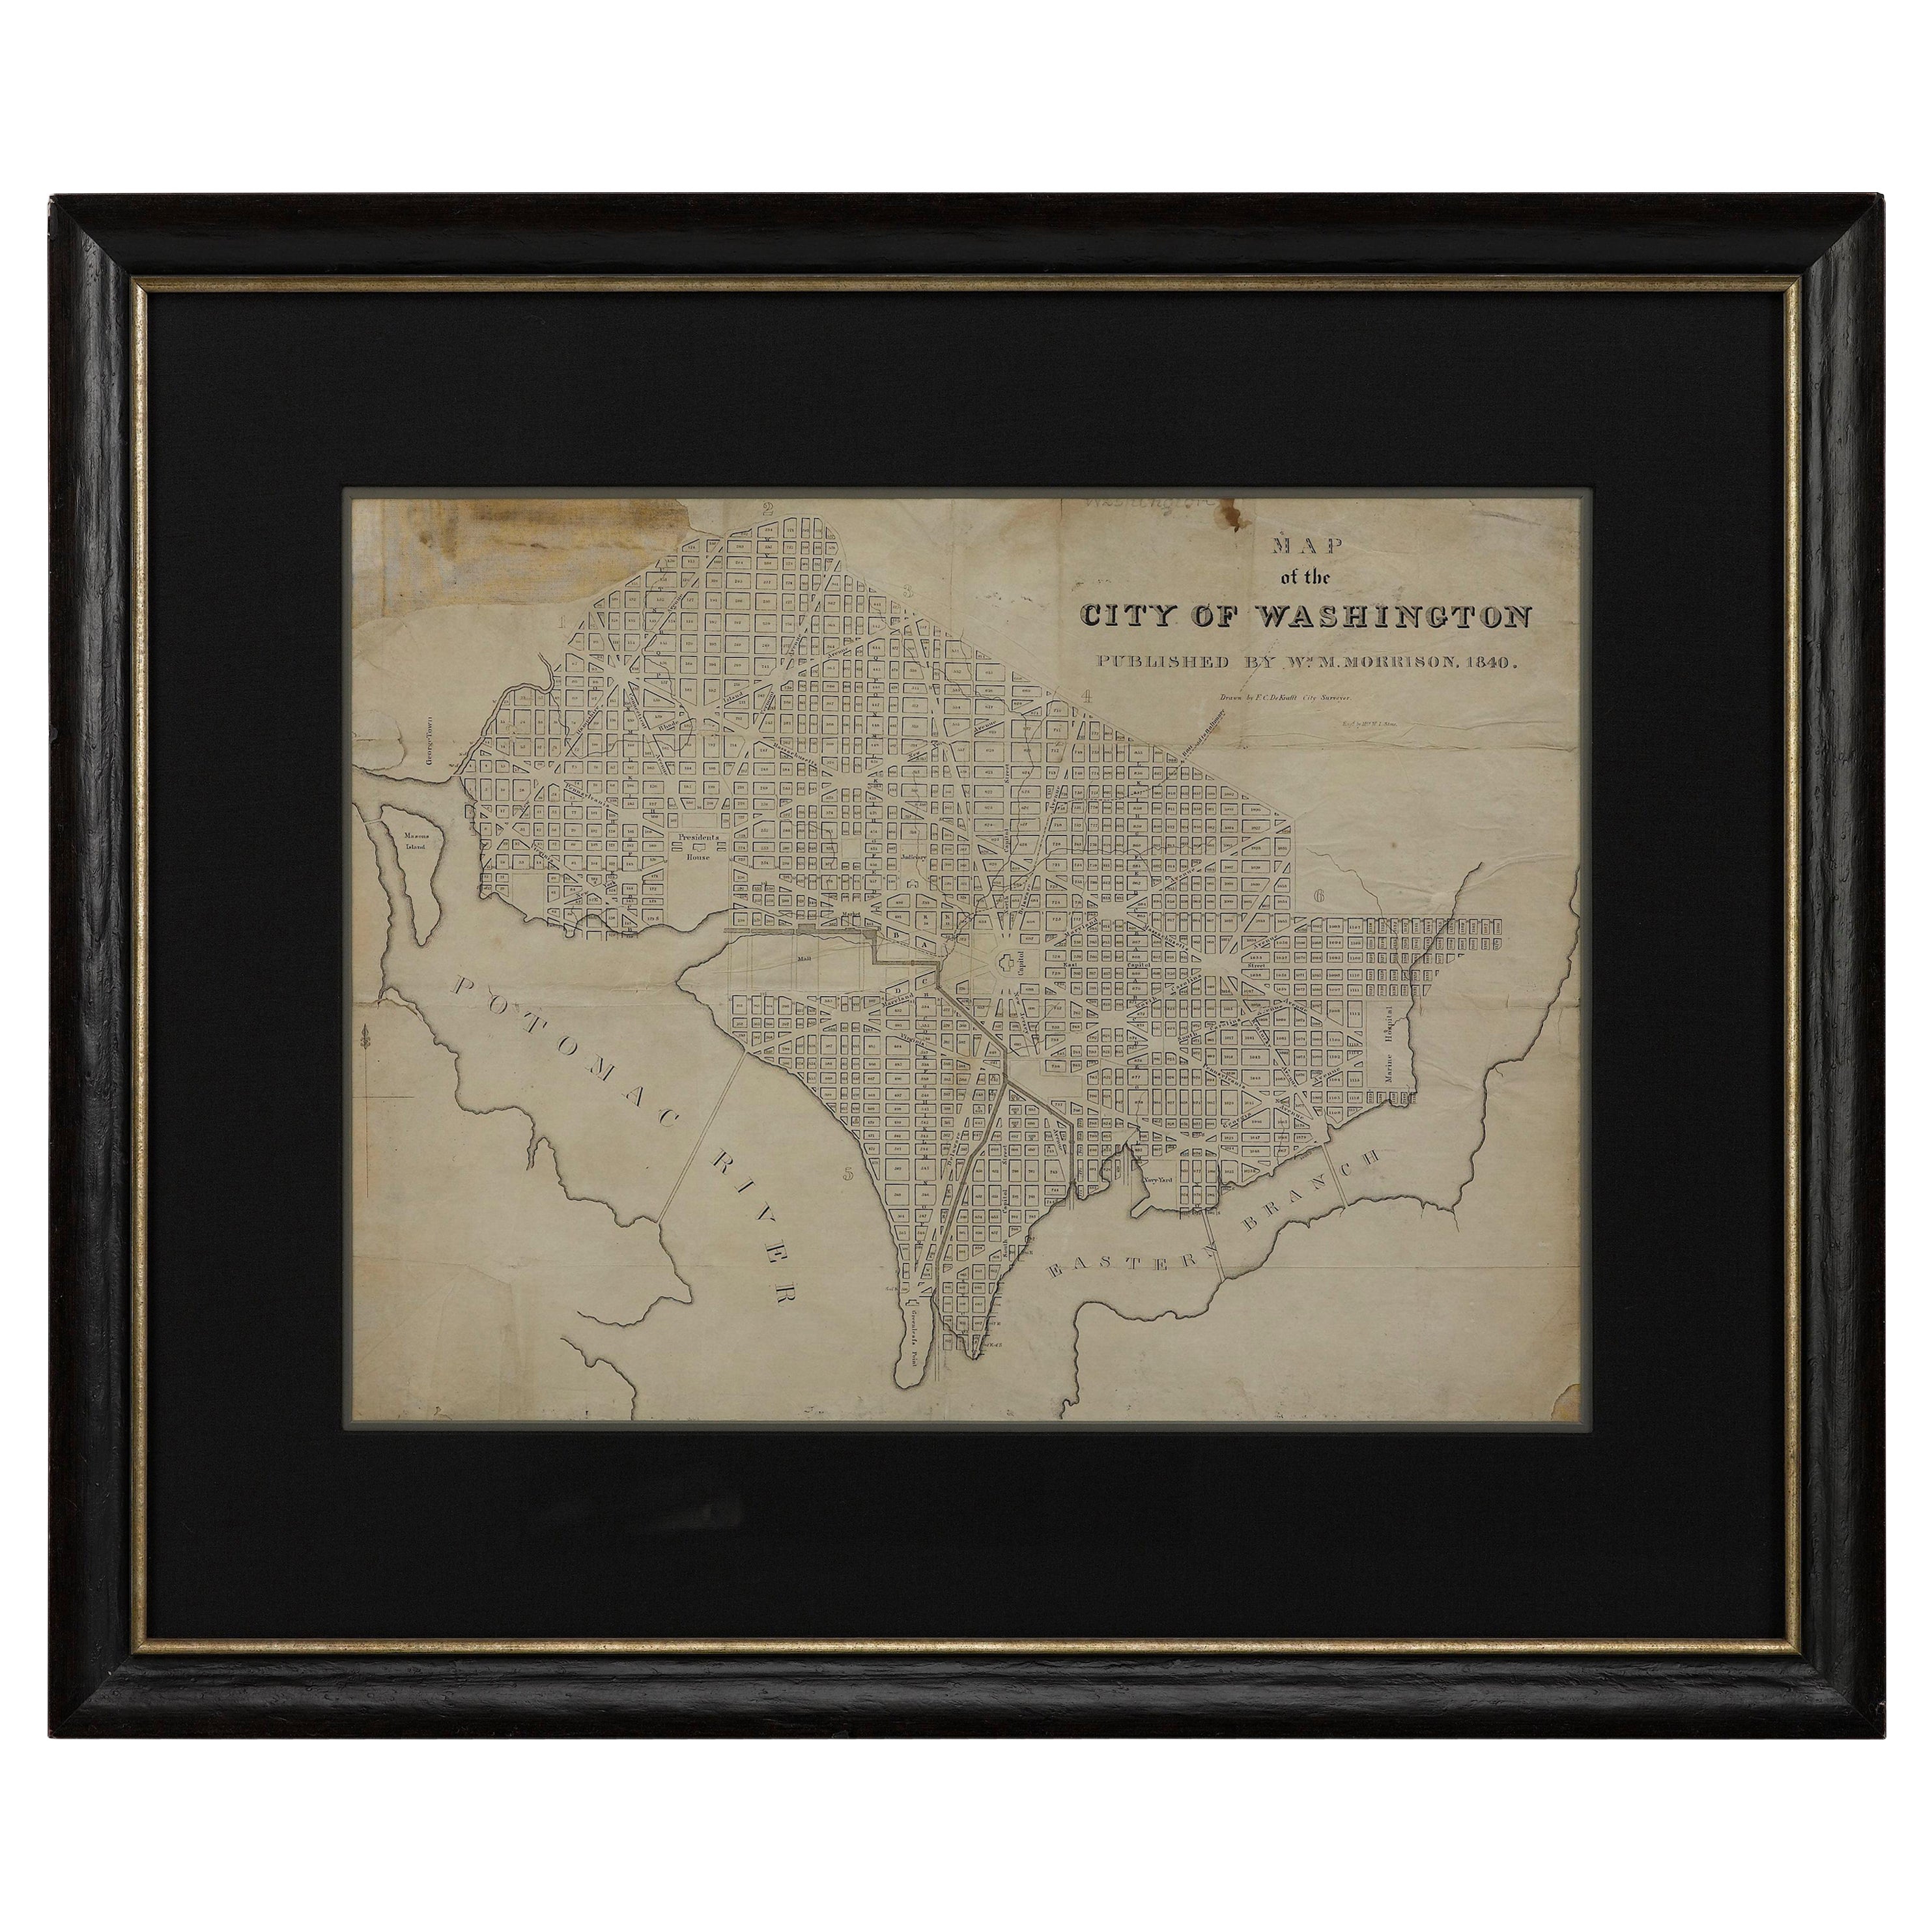 1840 Map of the City of Washington Published by William M. Morrison For Sale